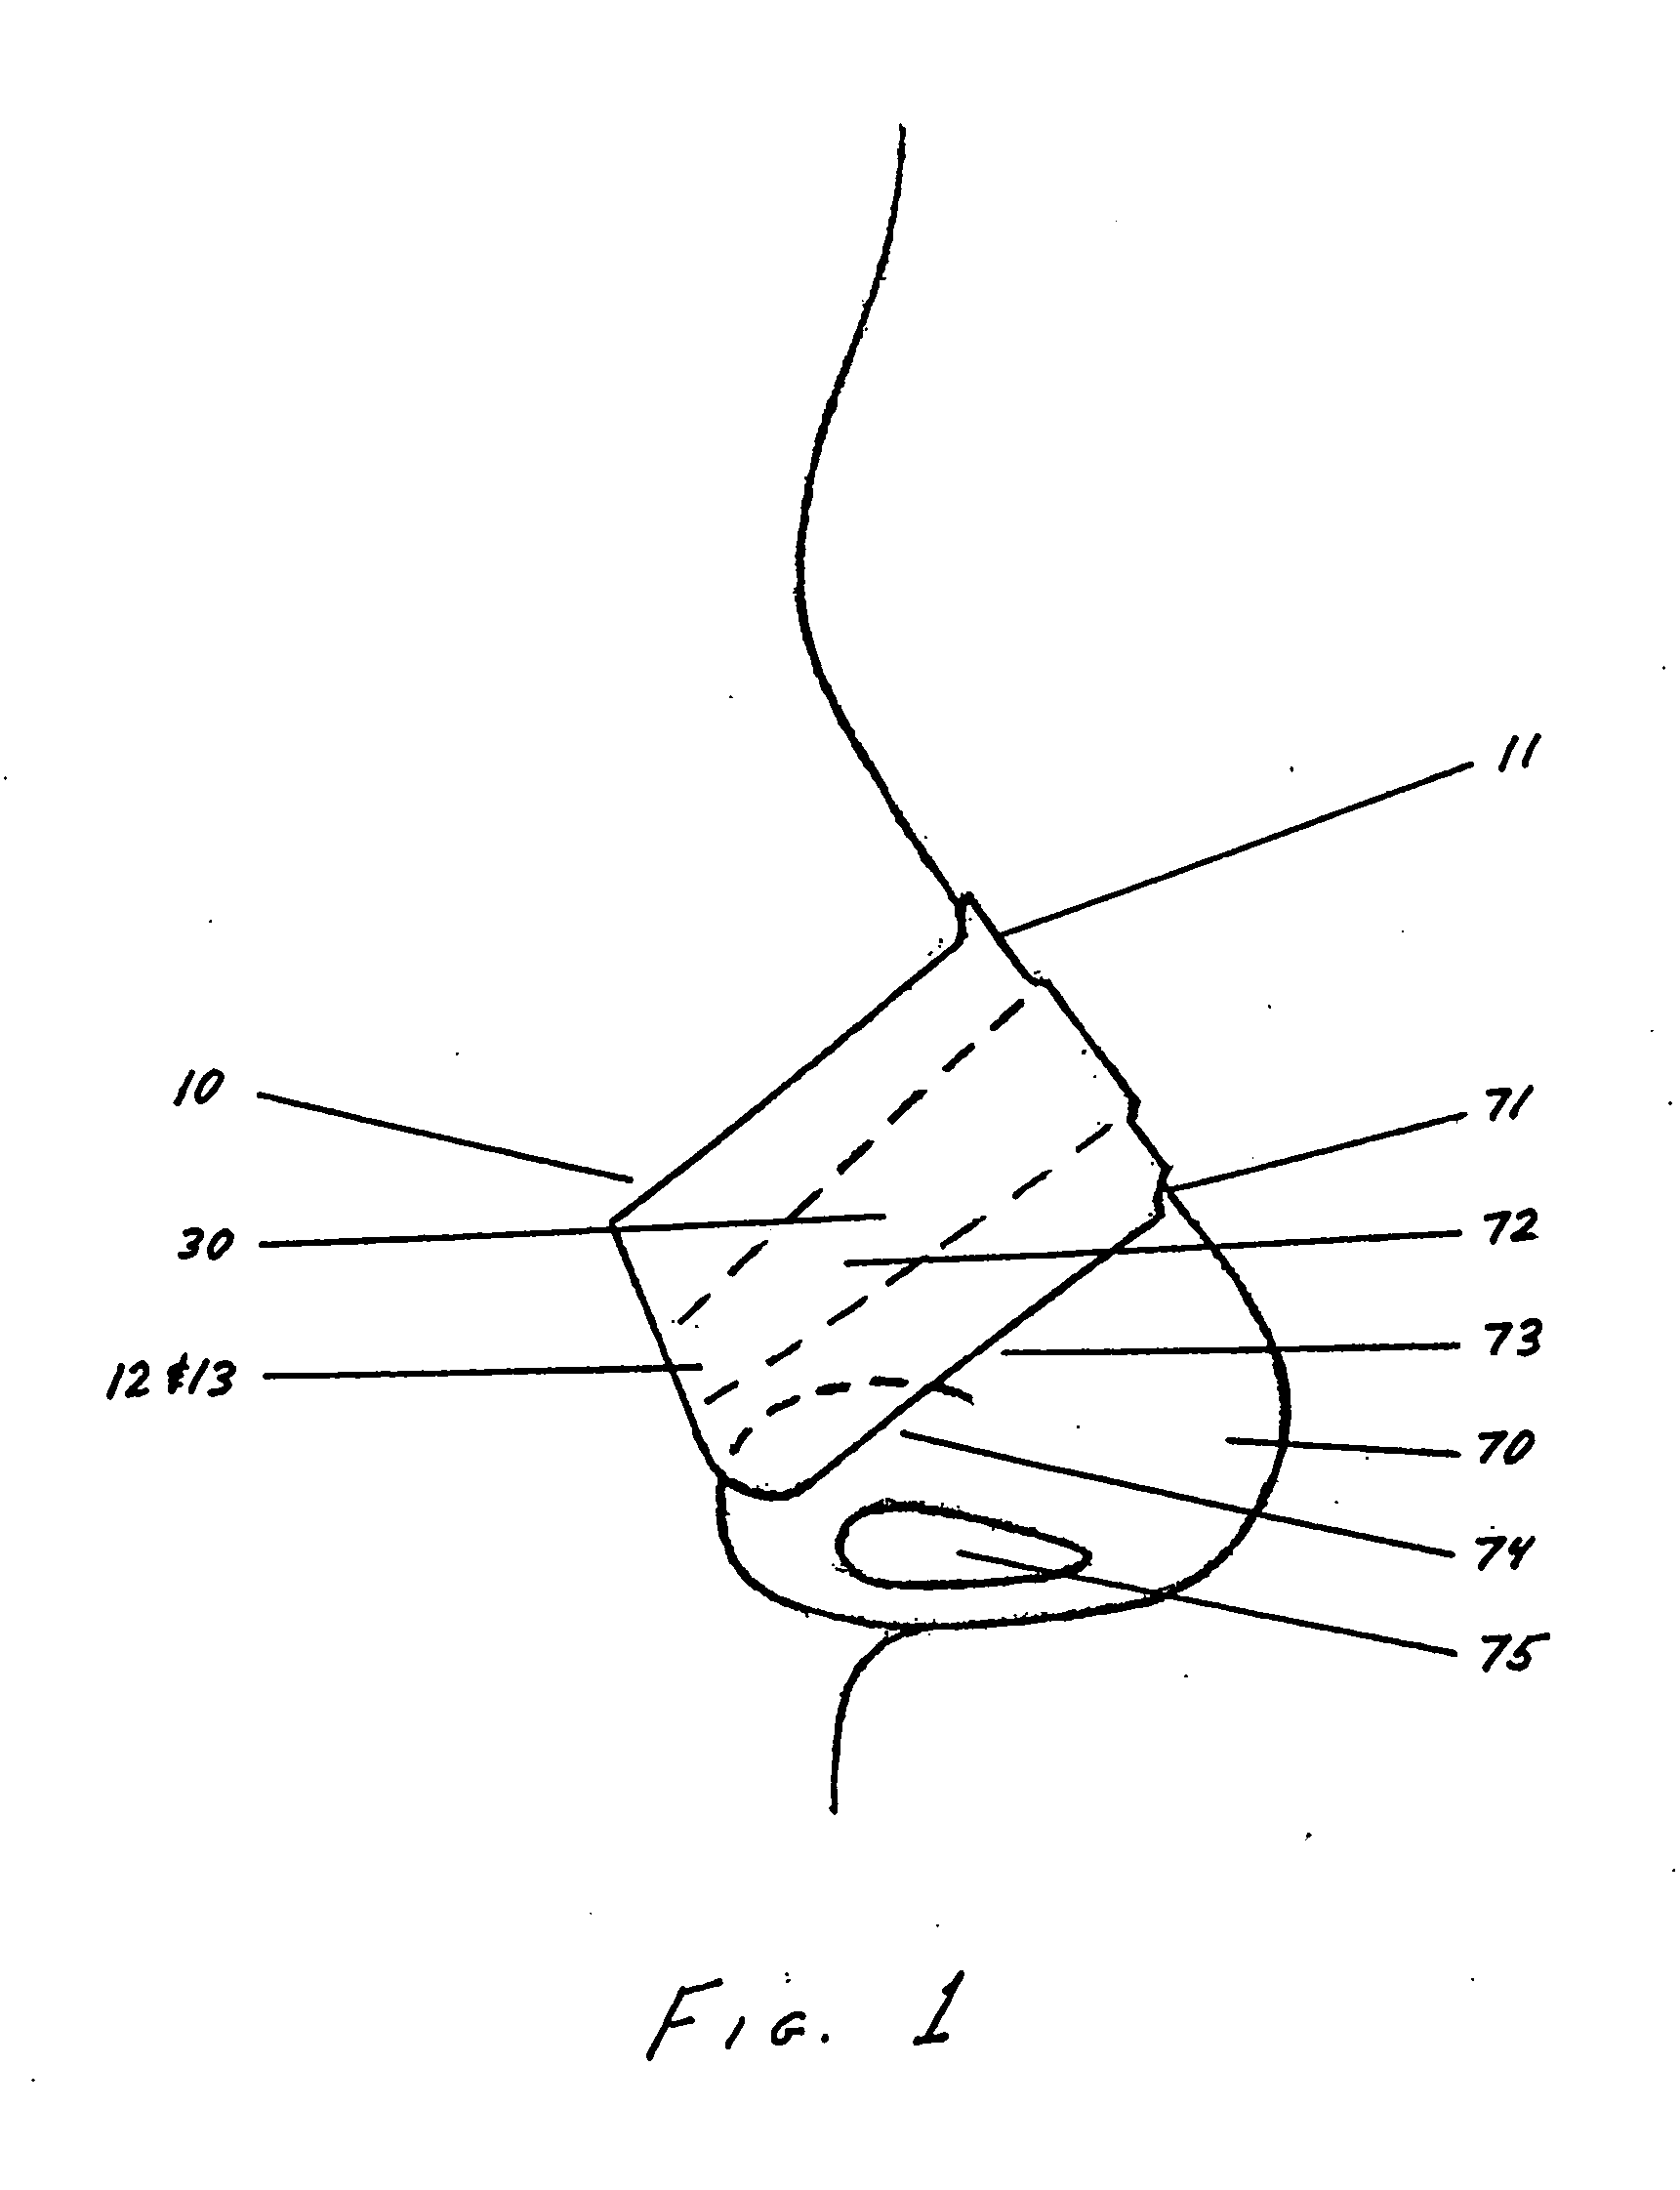 Nasal strip with variable spring rate